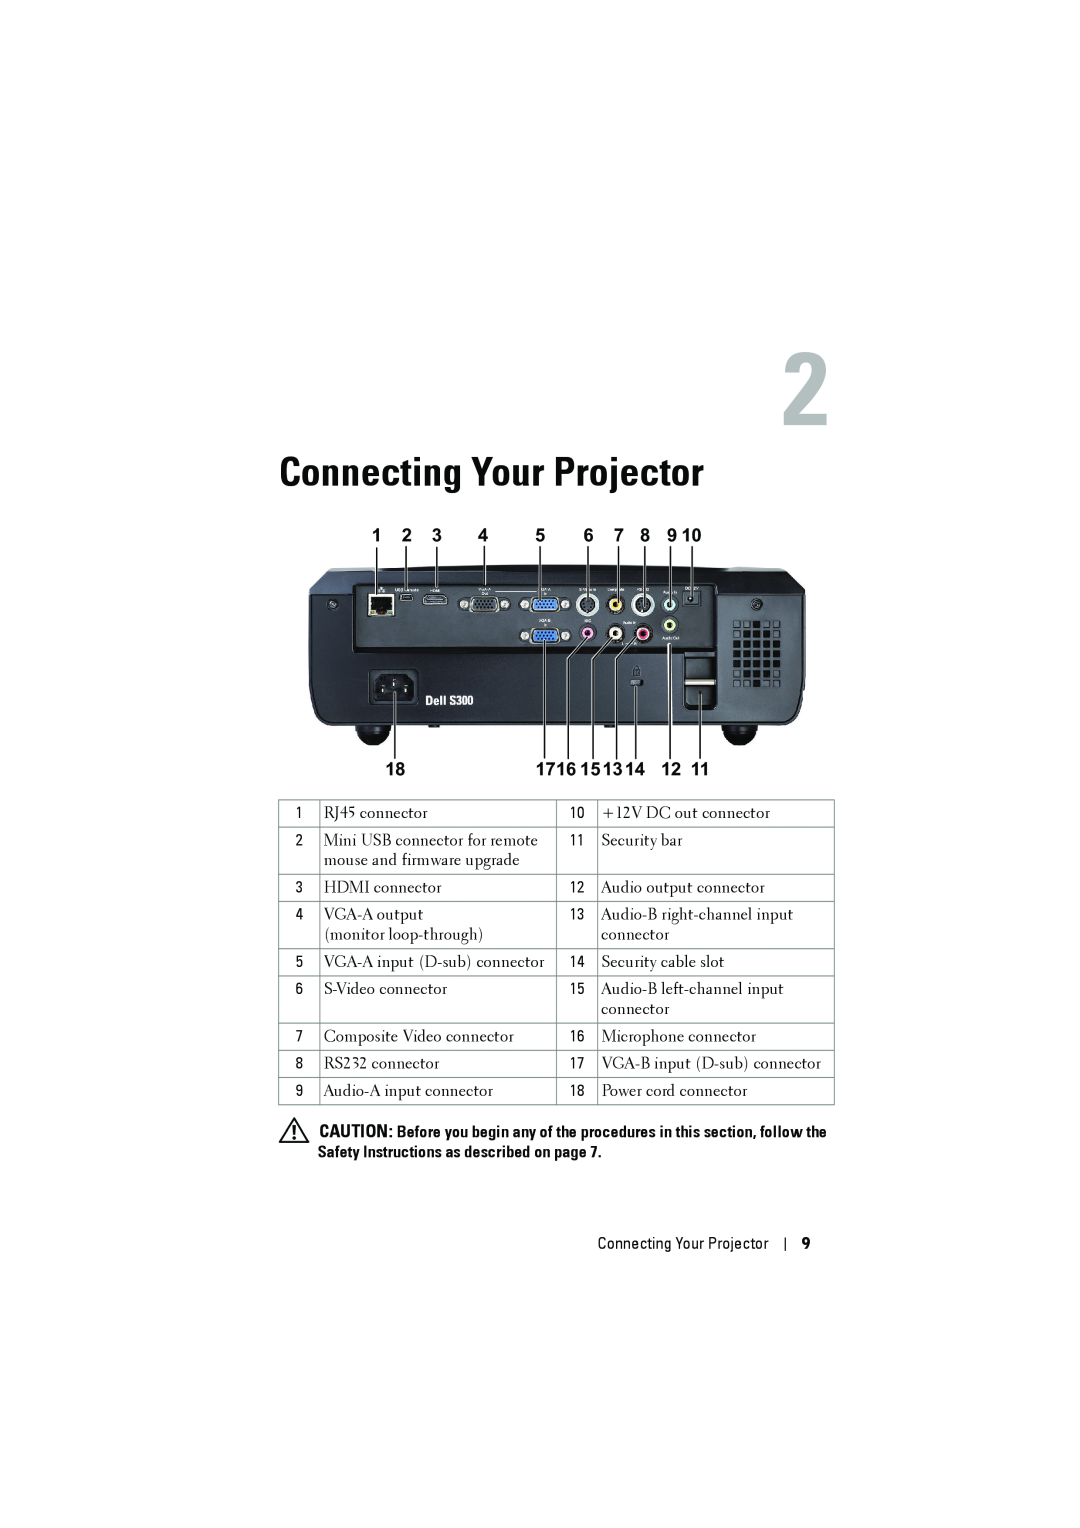 Dell S300 manual Connecting Your Projector, 1716 